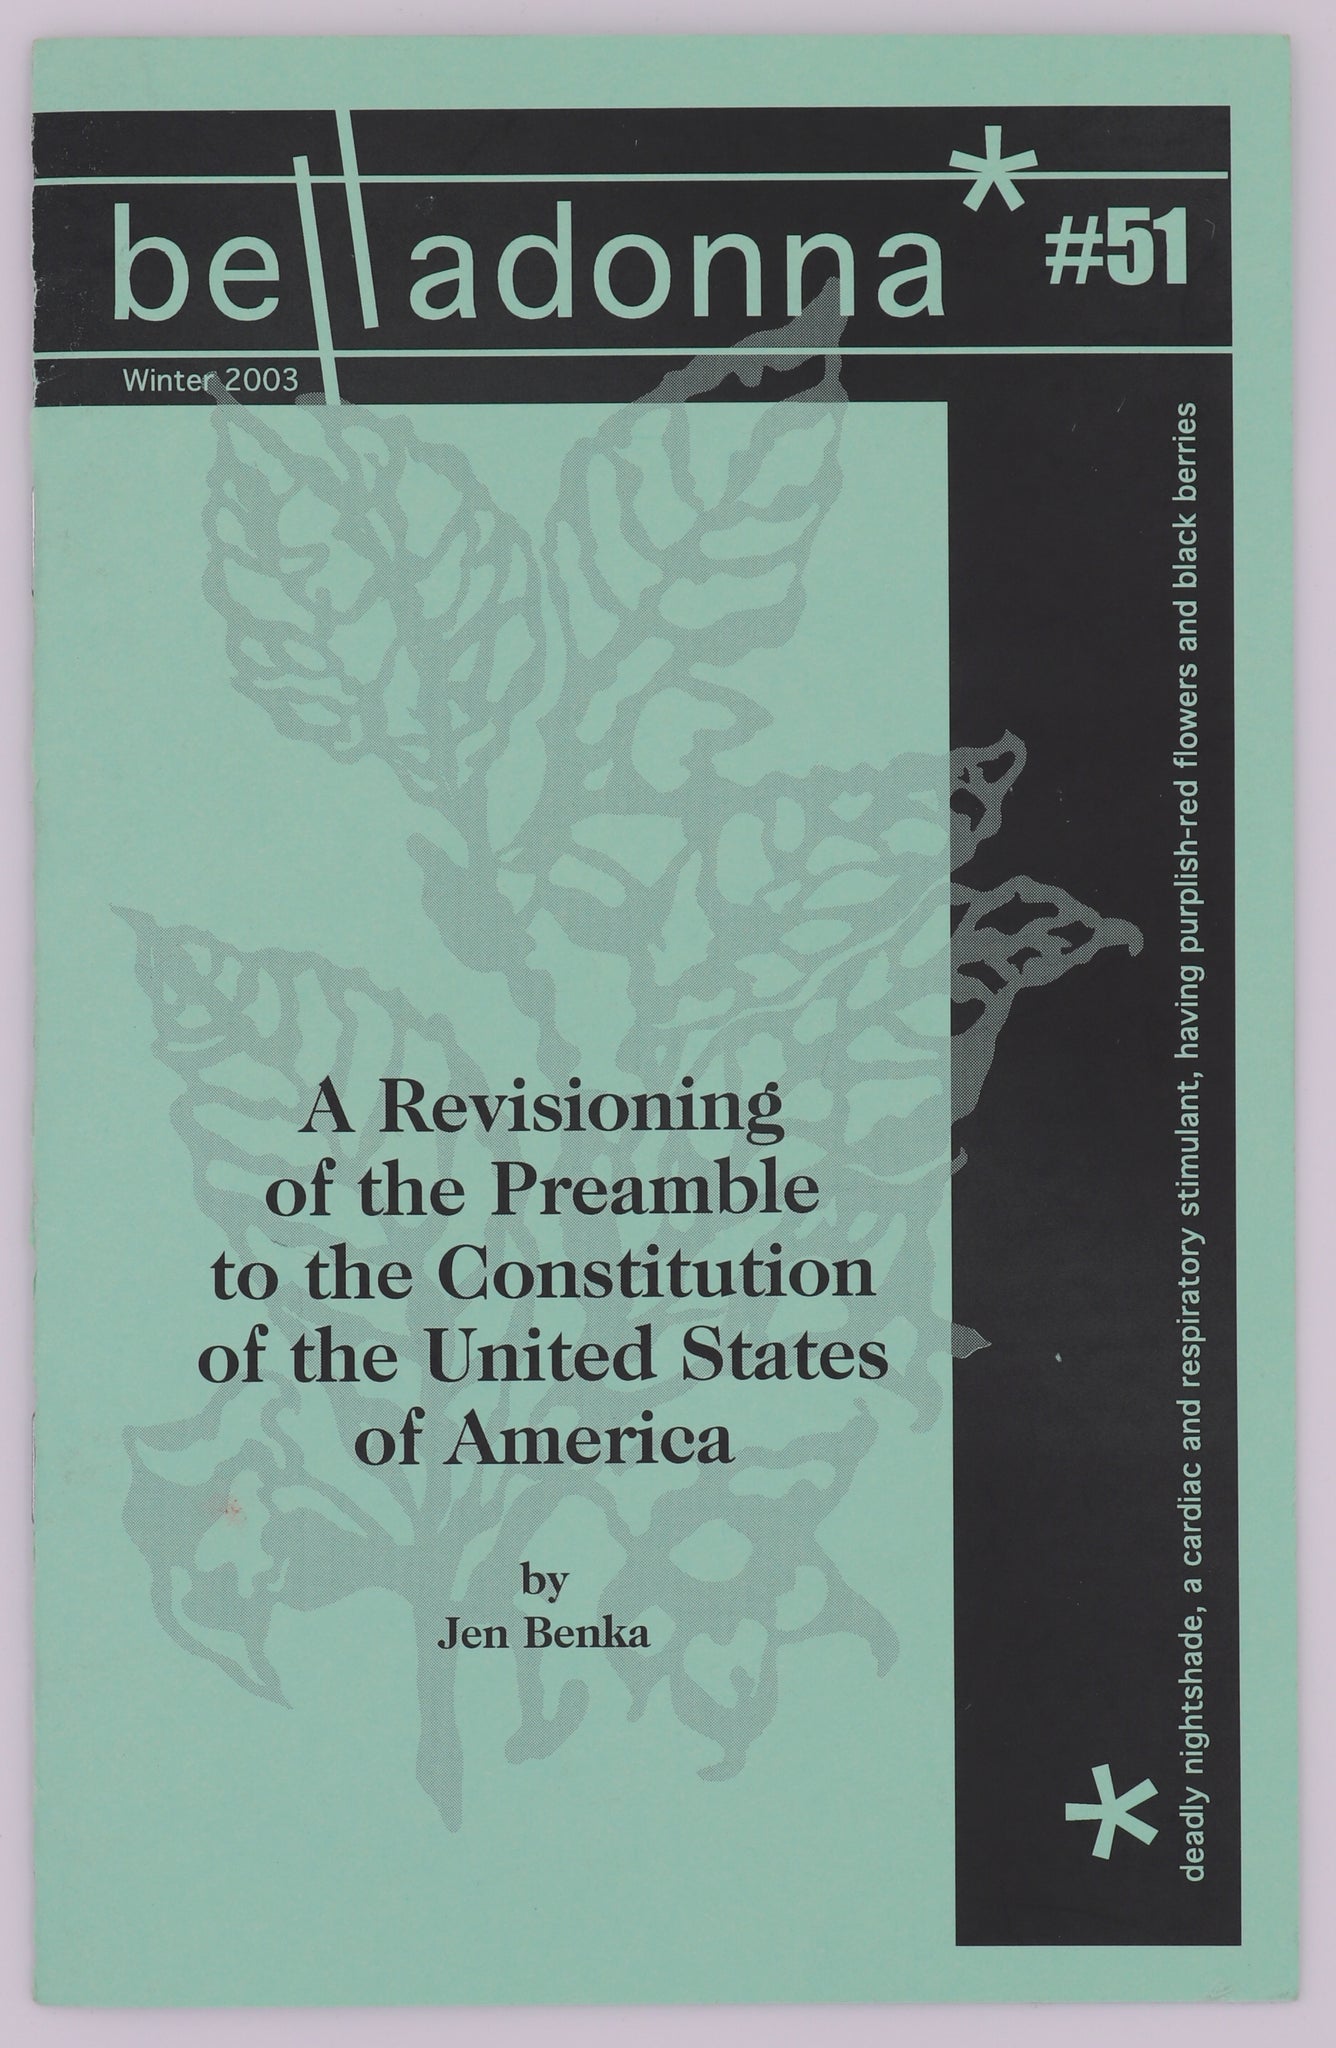 A Revisioning of the Preamble to the Constitution of the United States of America (Belladonna* #51)